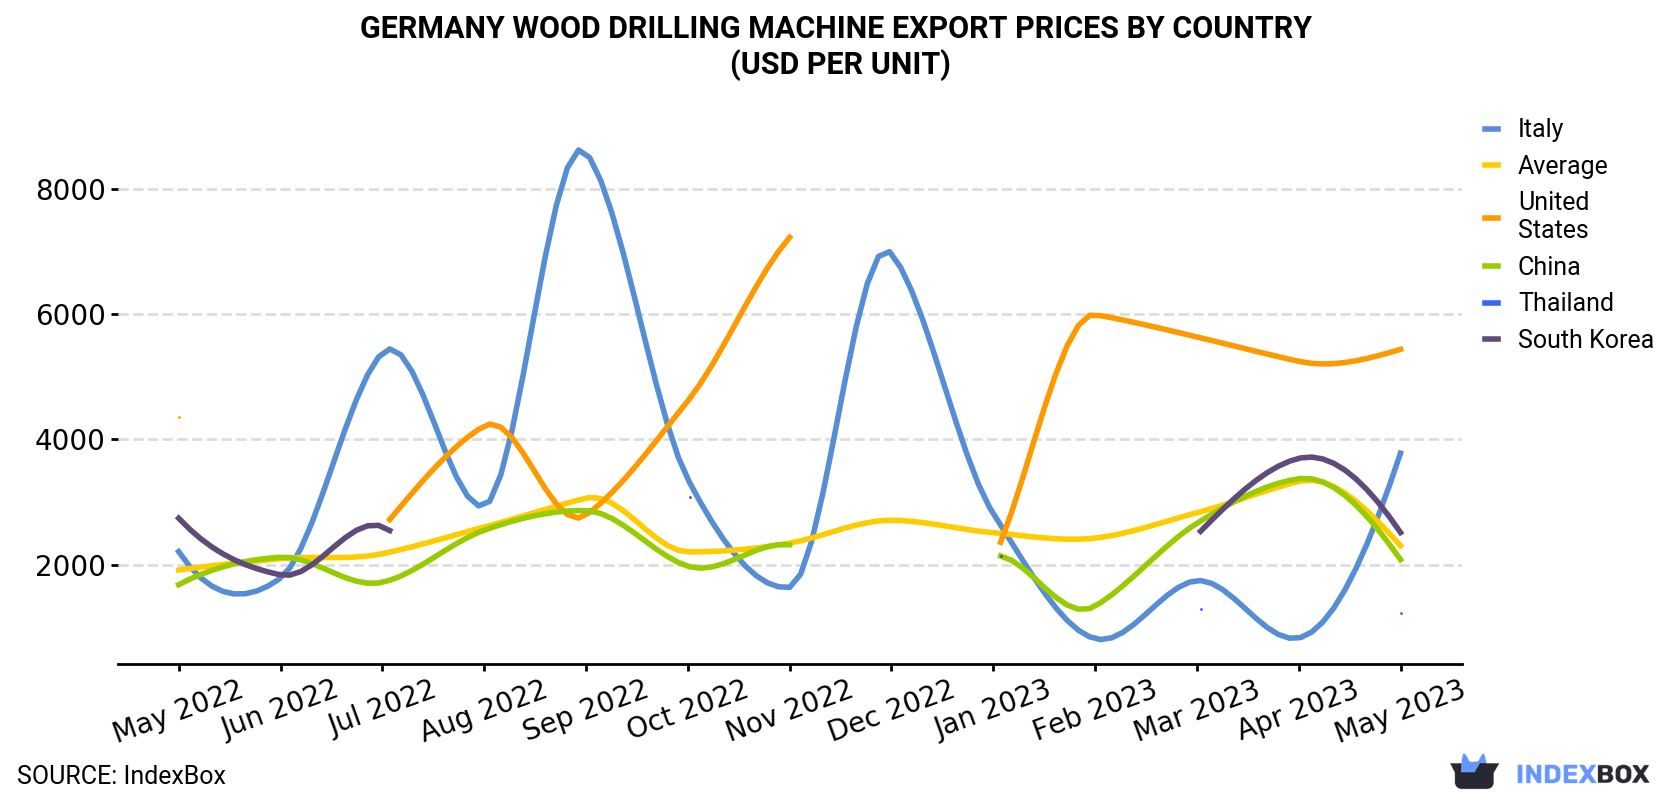 Germany Wood Drilling Machine Export Prices By Country (USD Per Unit)